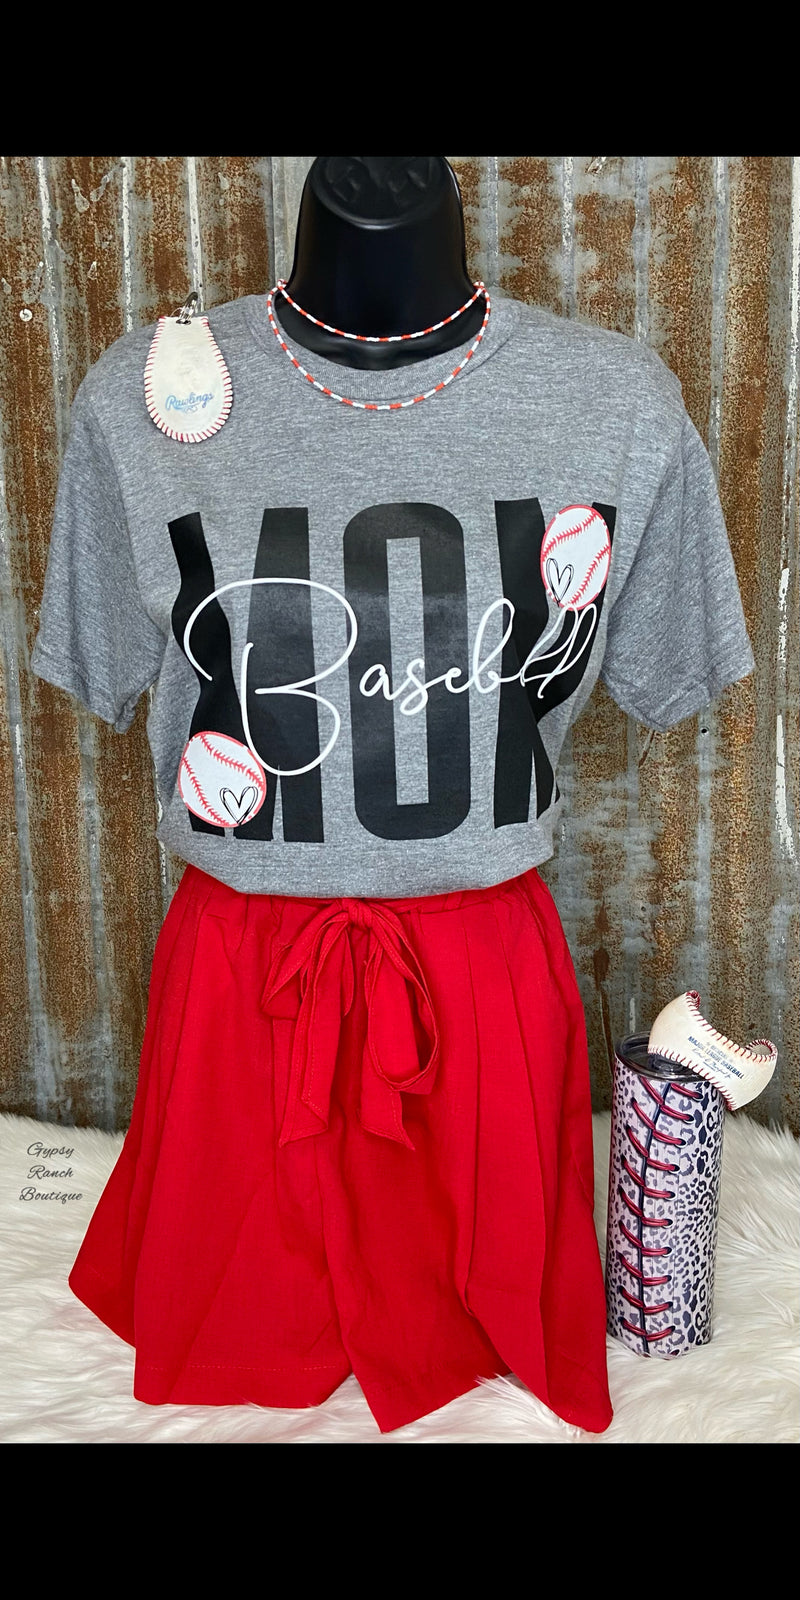 Baseball MOM Top - Also in Plus Size